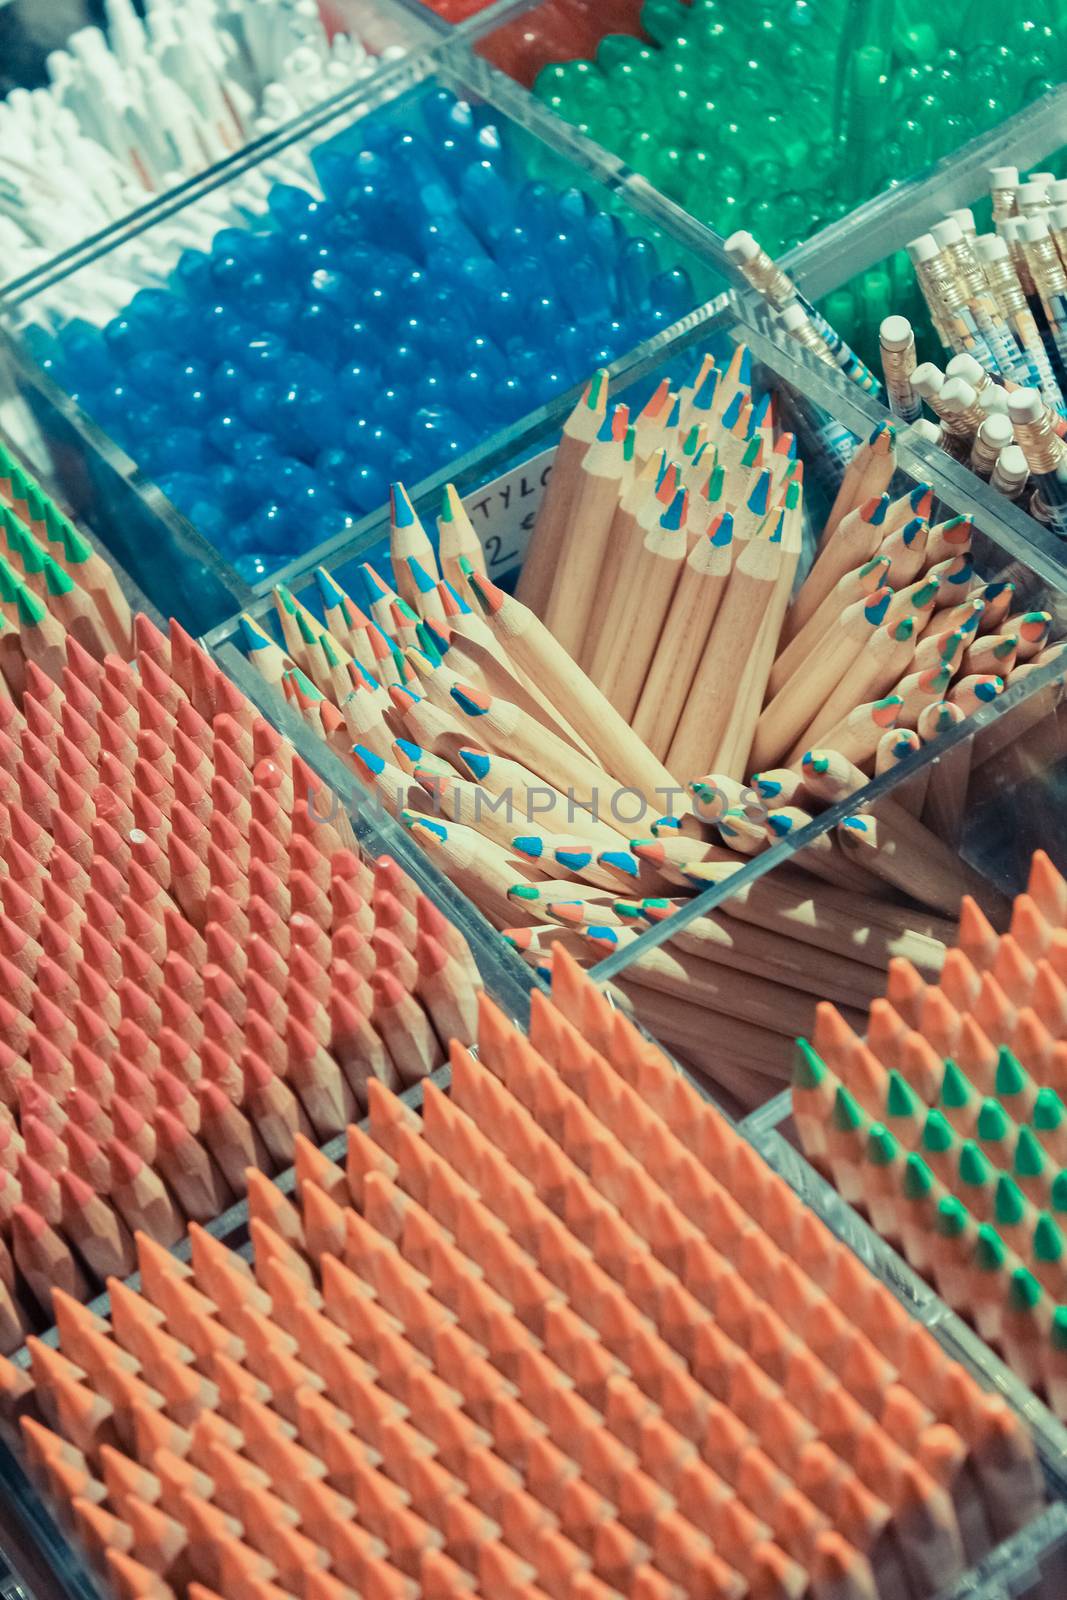 Background of colored pencils for creativity closeup. Instagram style filtred image